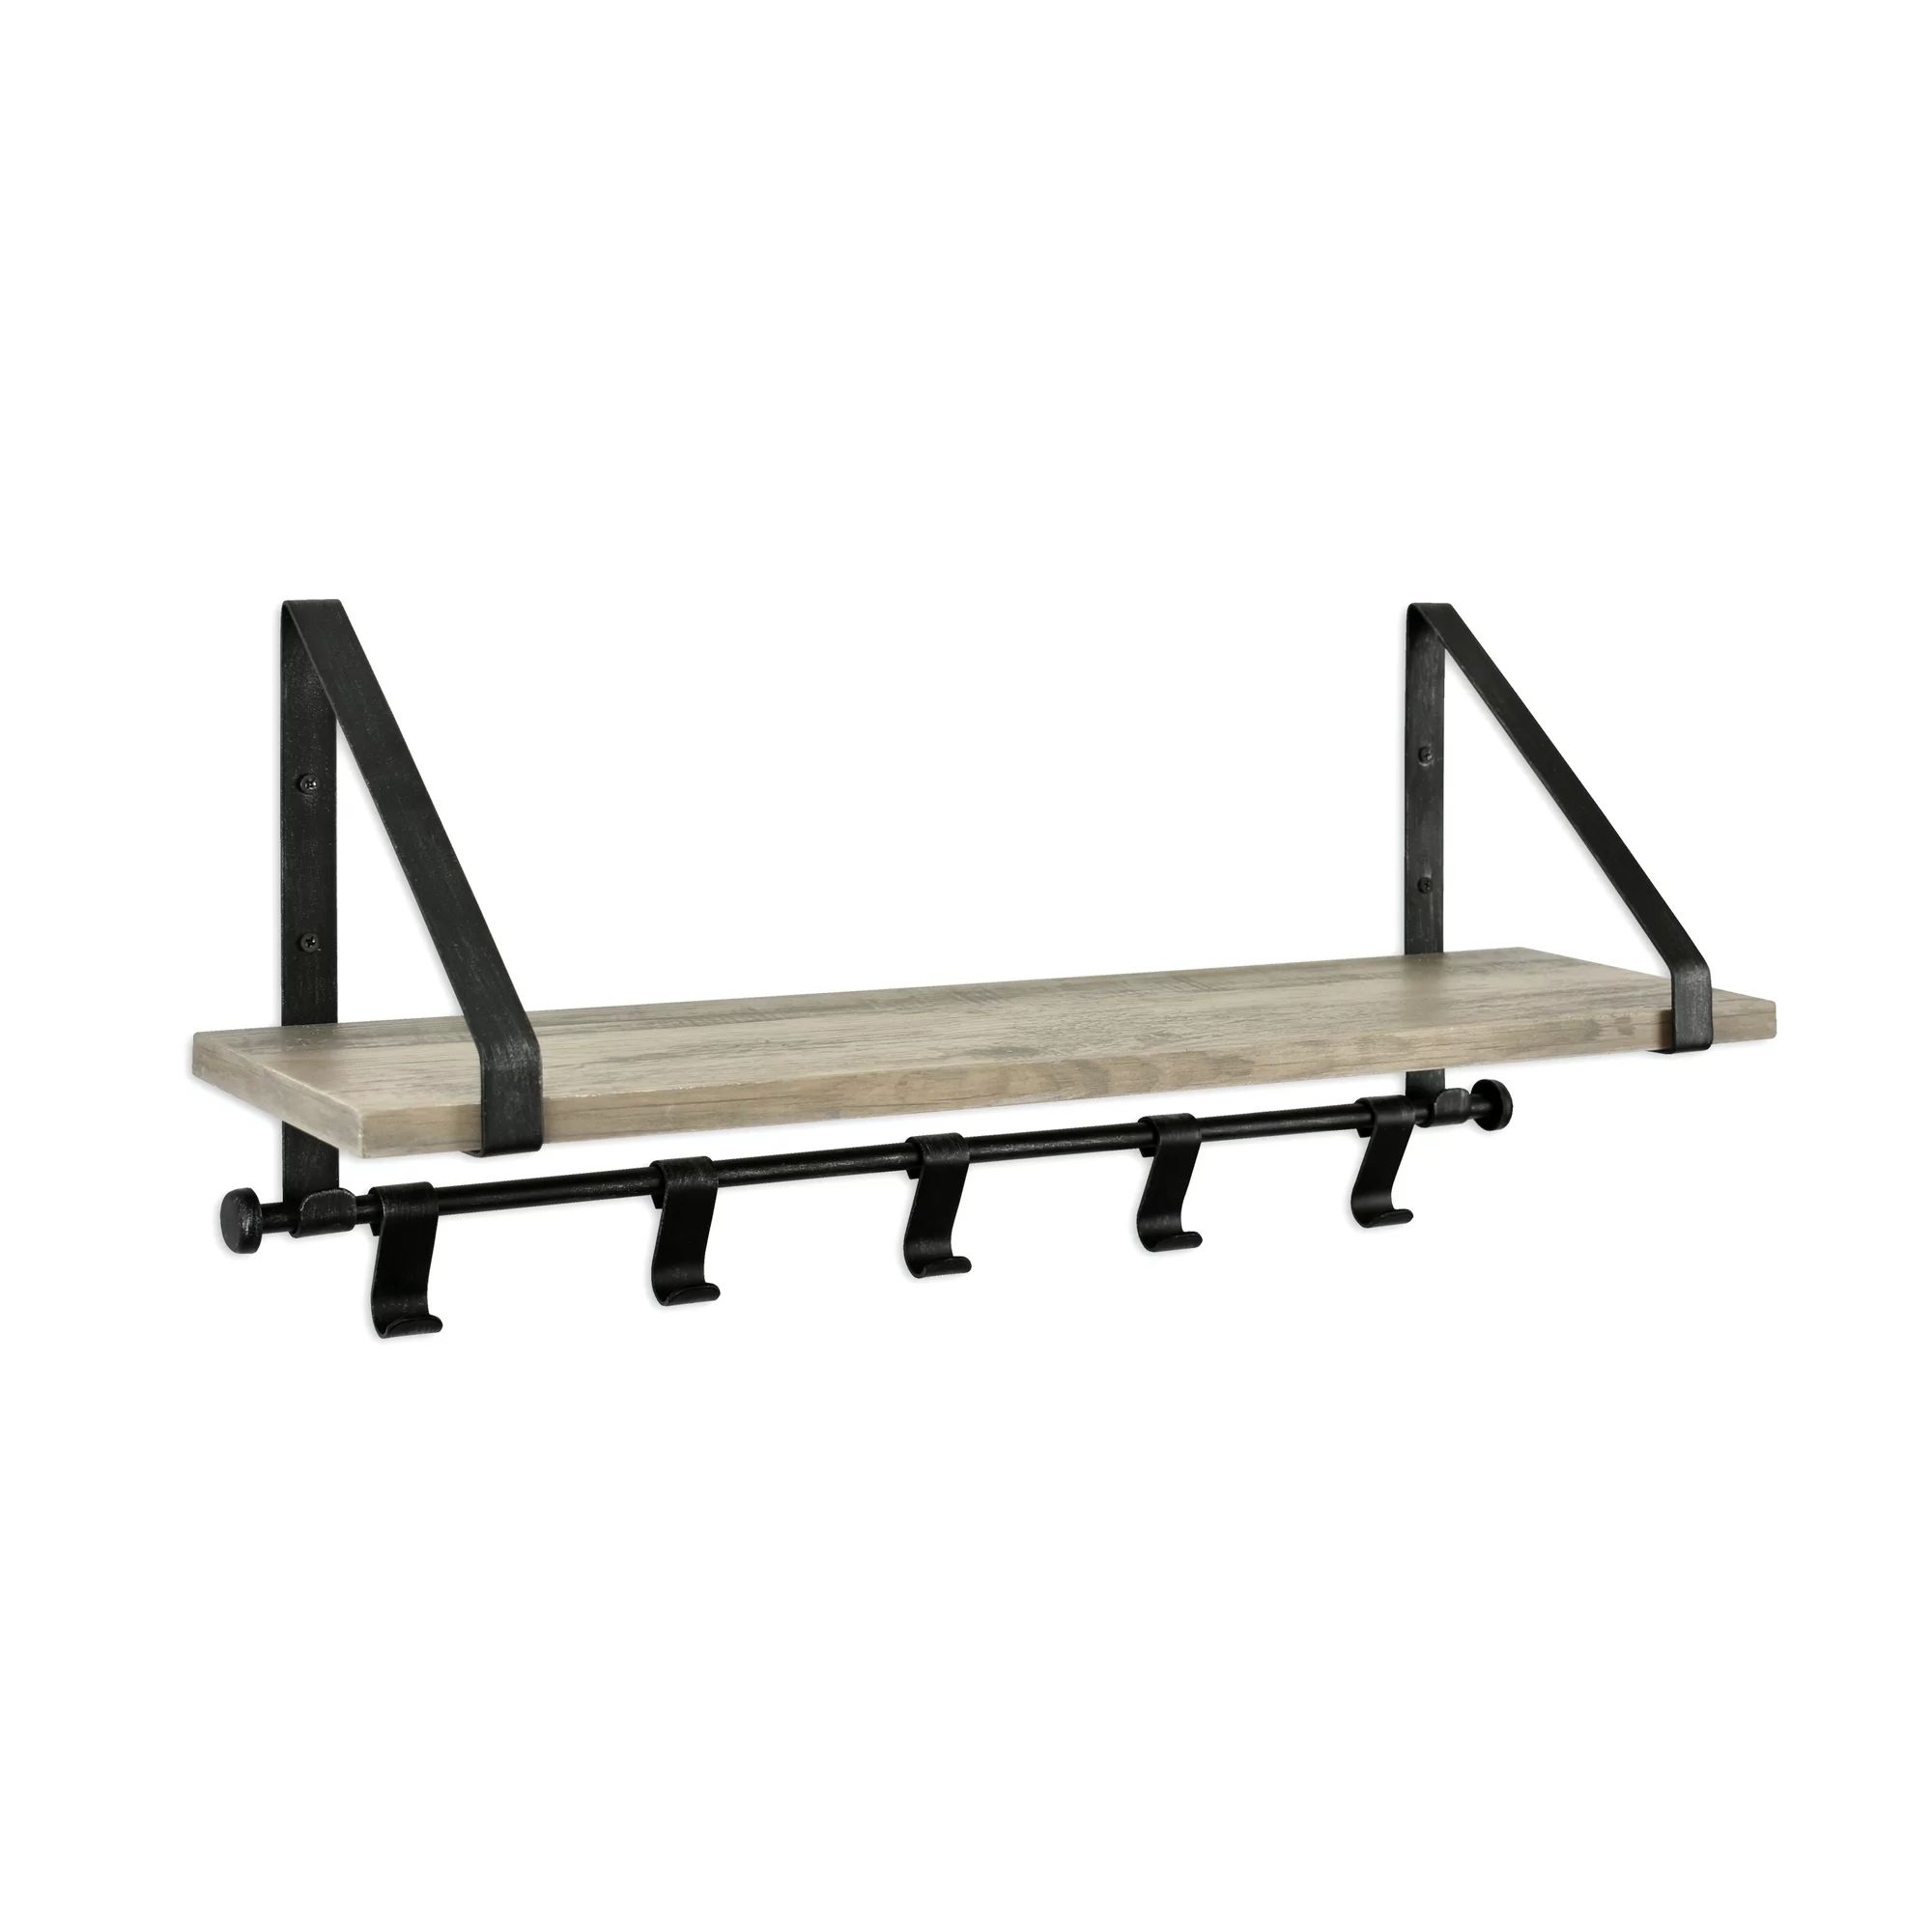 Better Homes & Gardens 23" Ledge with Hooks, Rustic Gray Finish | Walmart (US)